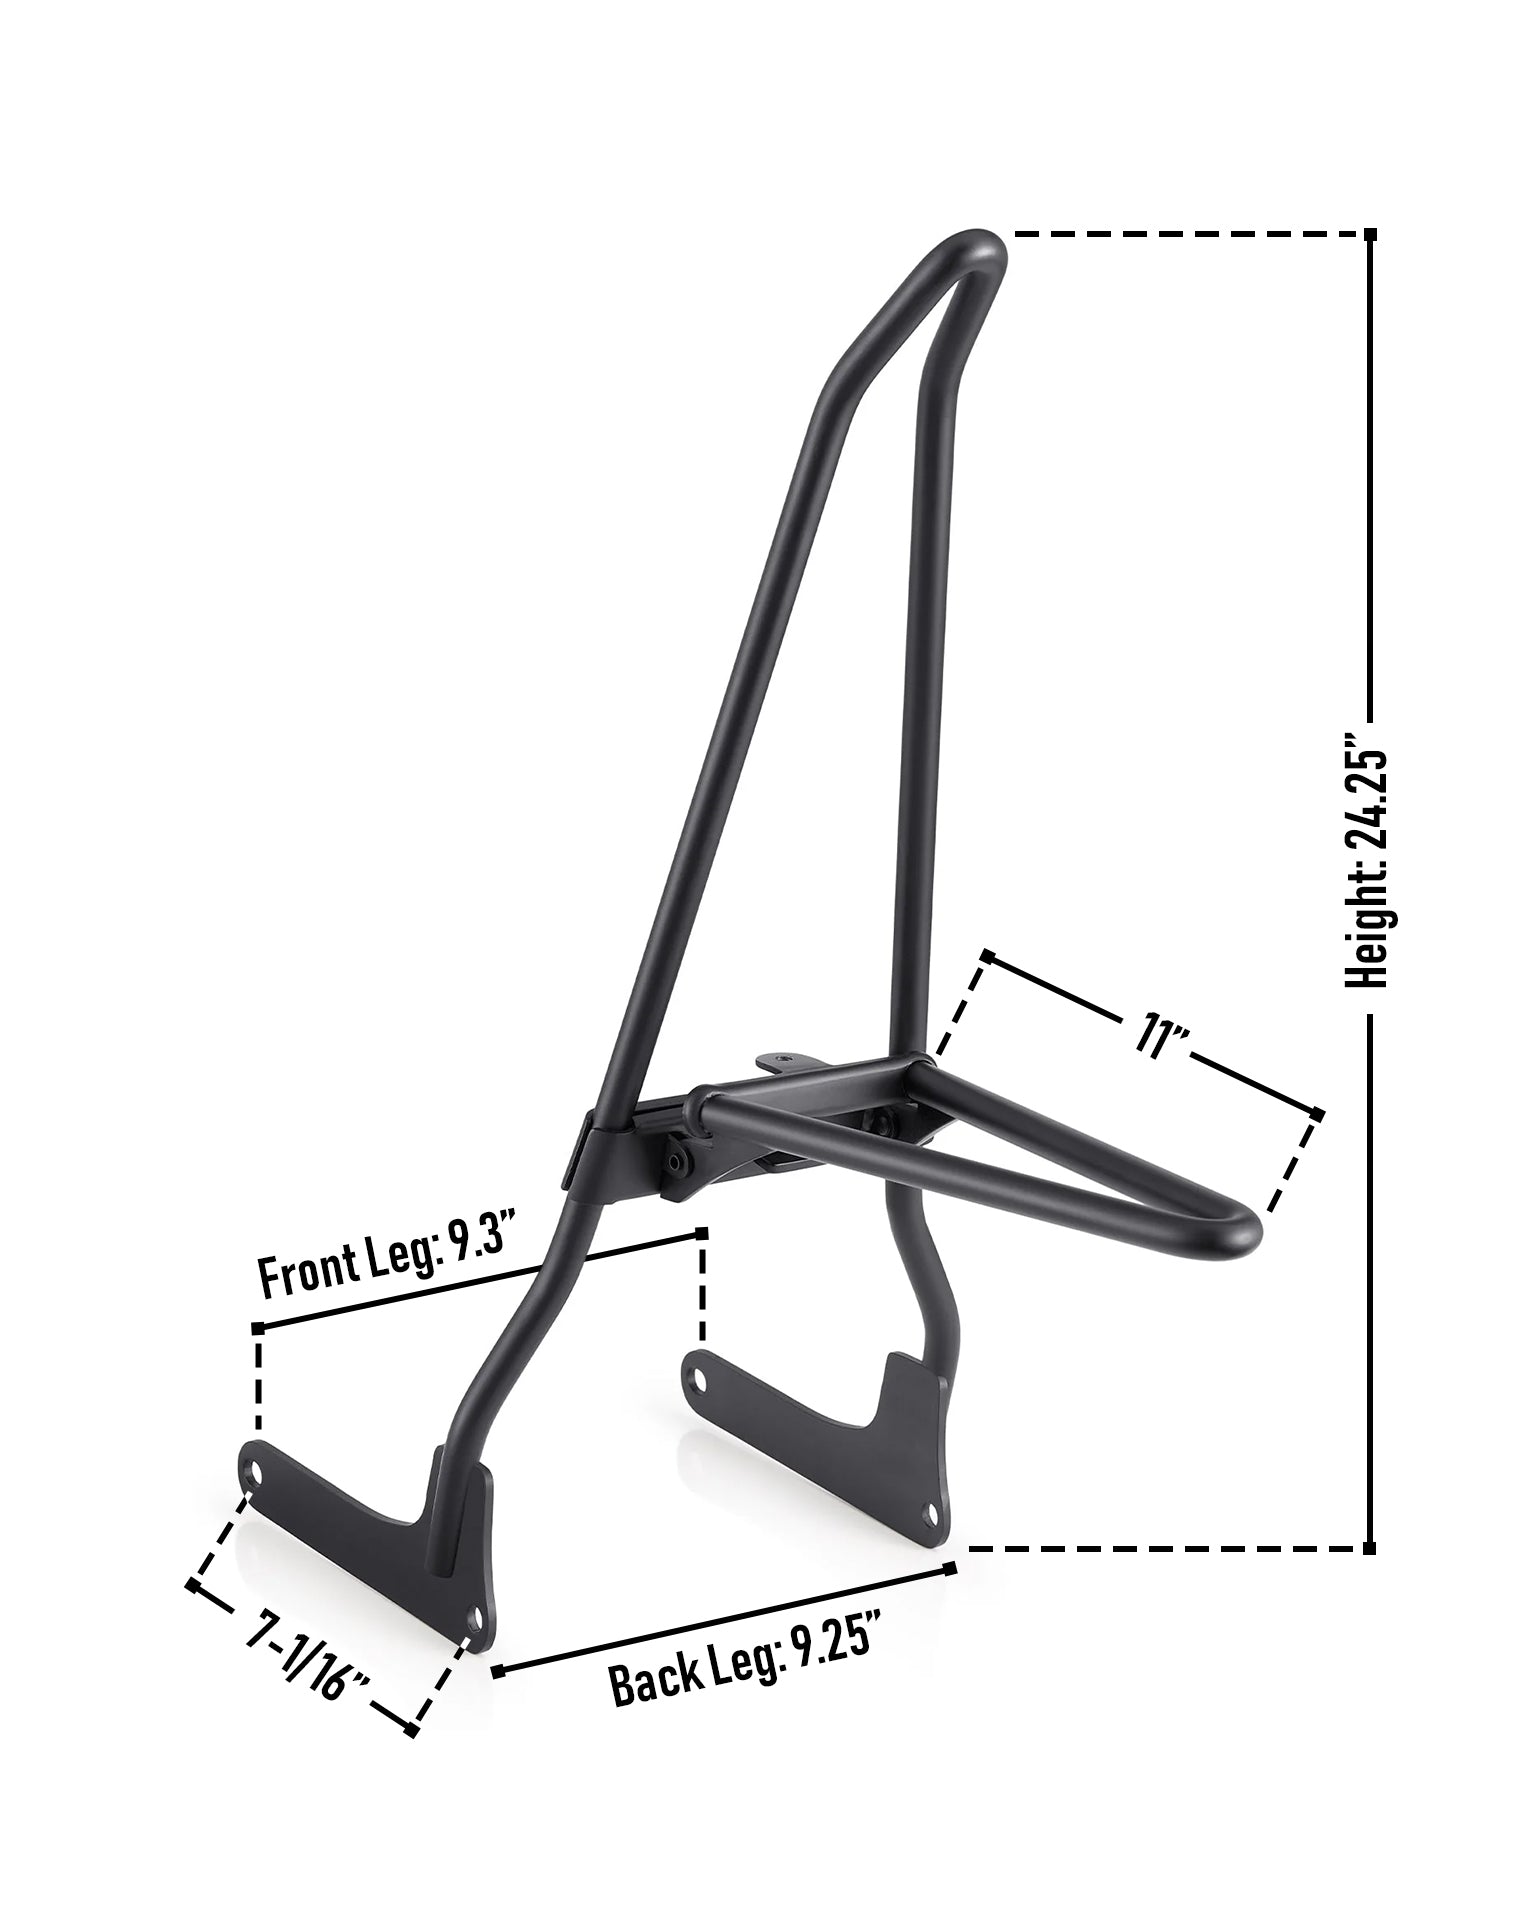 Iron Born Blade 25" Sissy Bar with Foldable Luggage Rack for Harley Softail Slim Matte Black Dimension